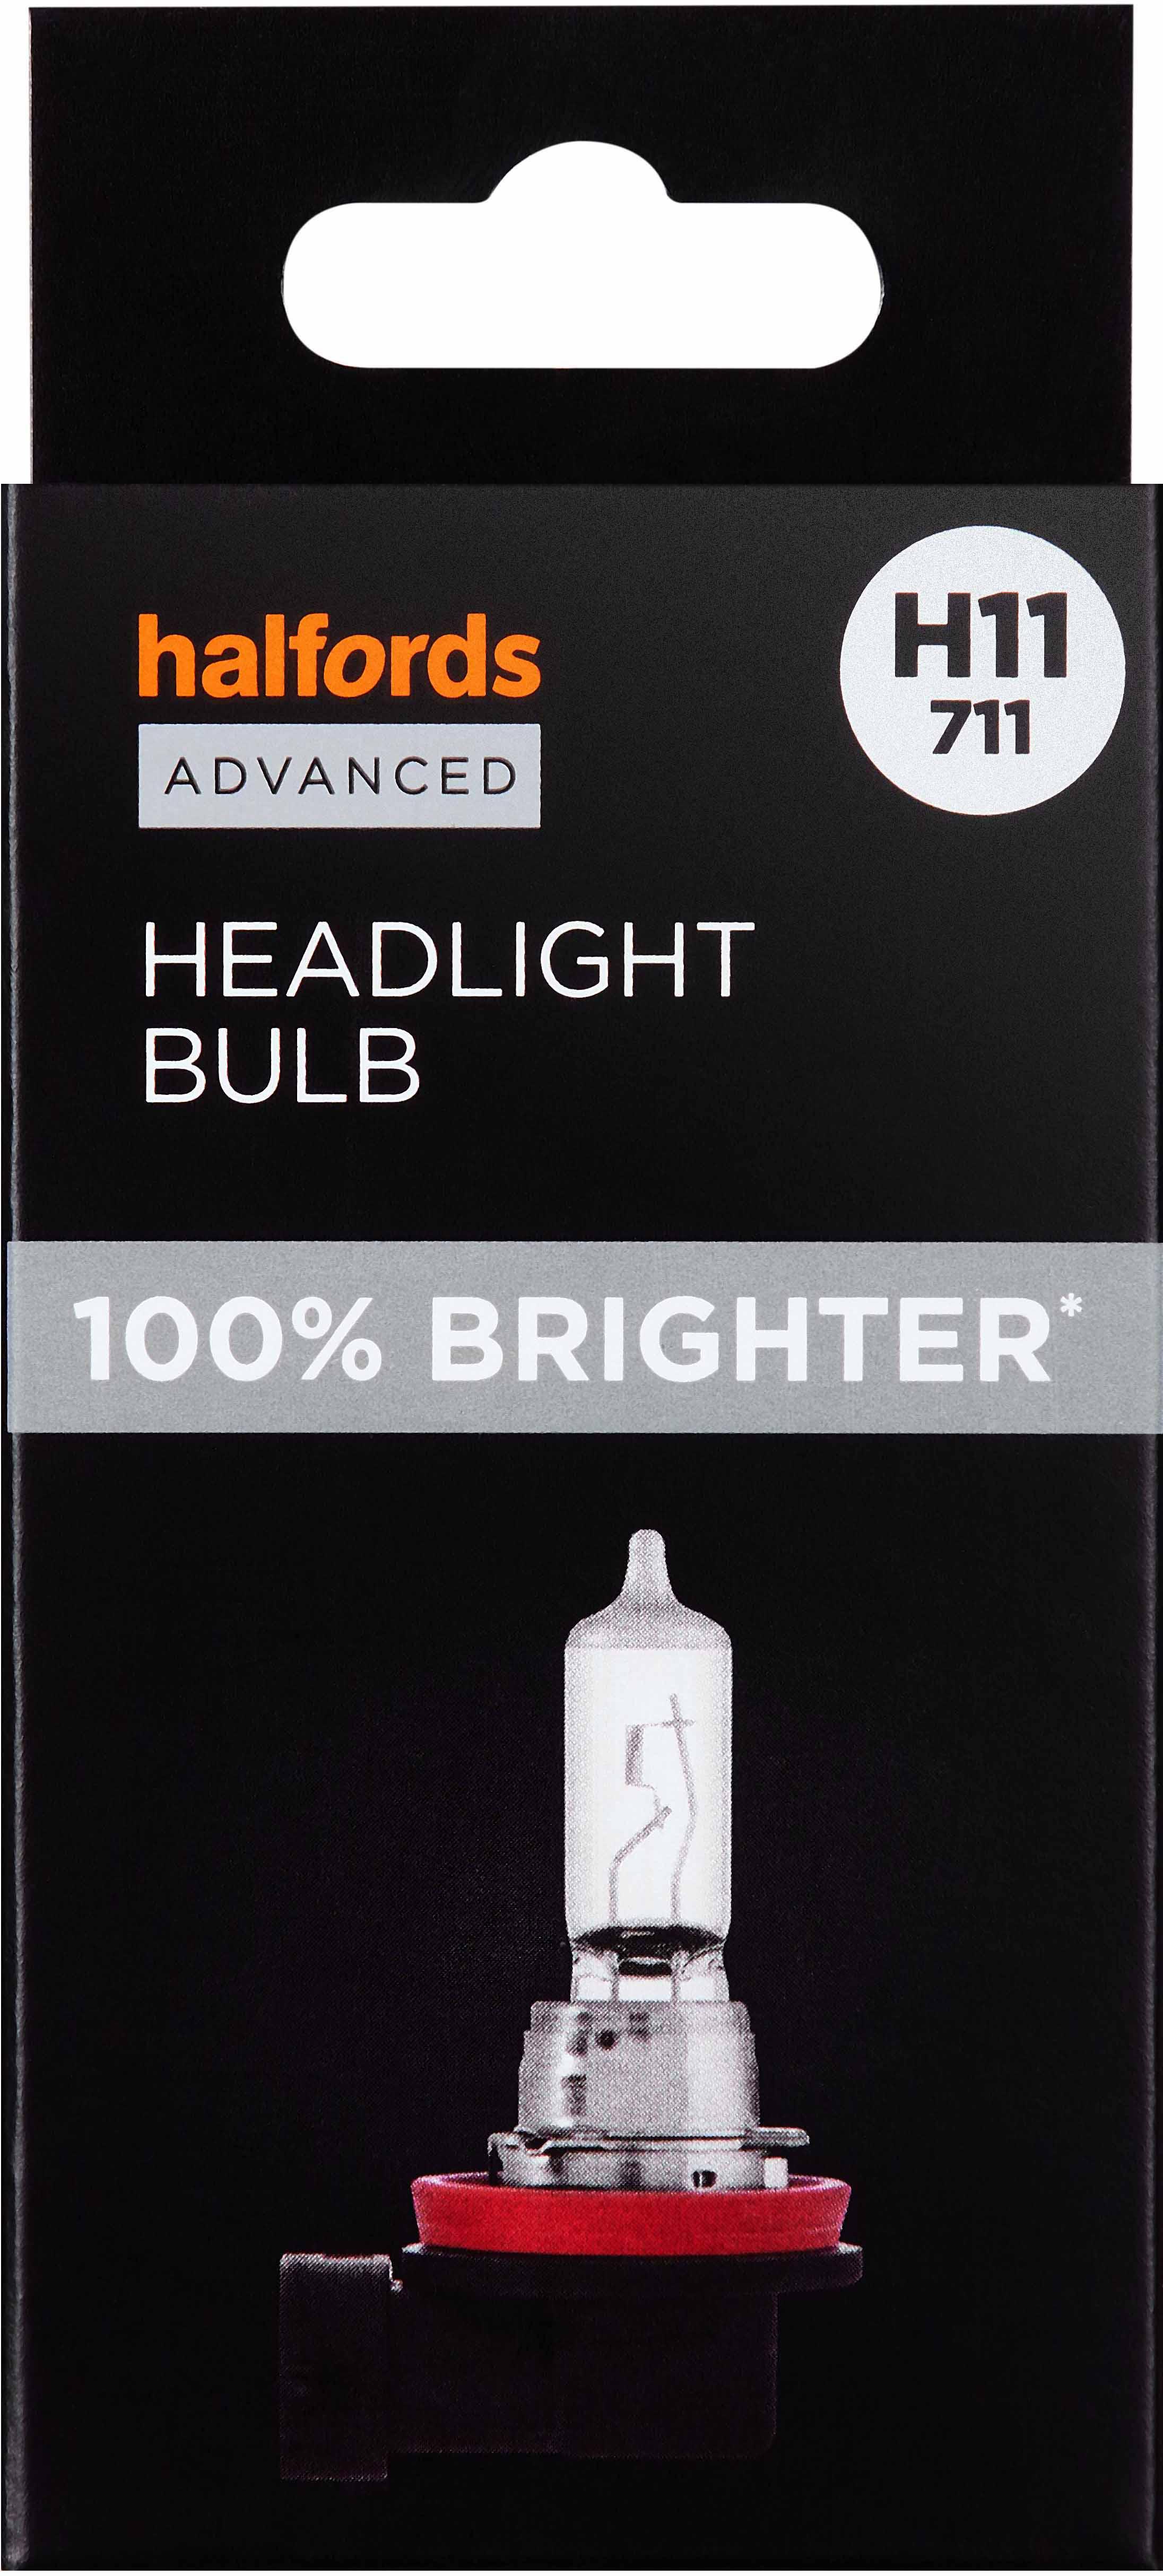 H11 711 Car Headlight Bulb Halfords Advanced Up To +100 Percent Brighter Single Pack